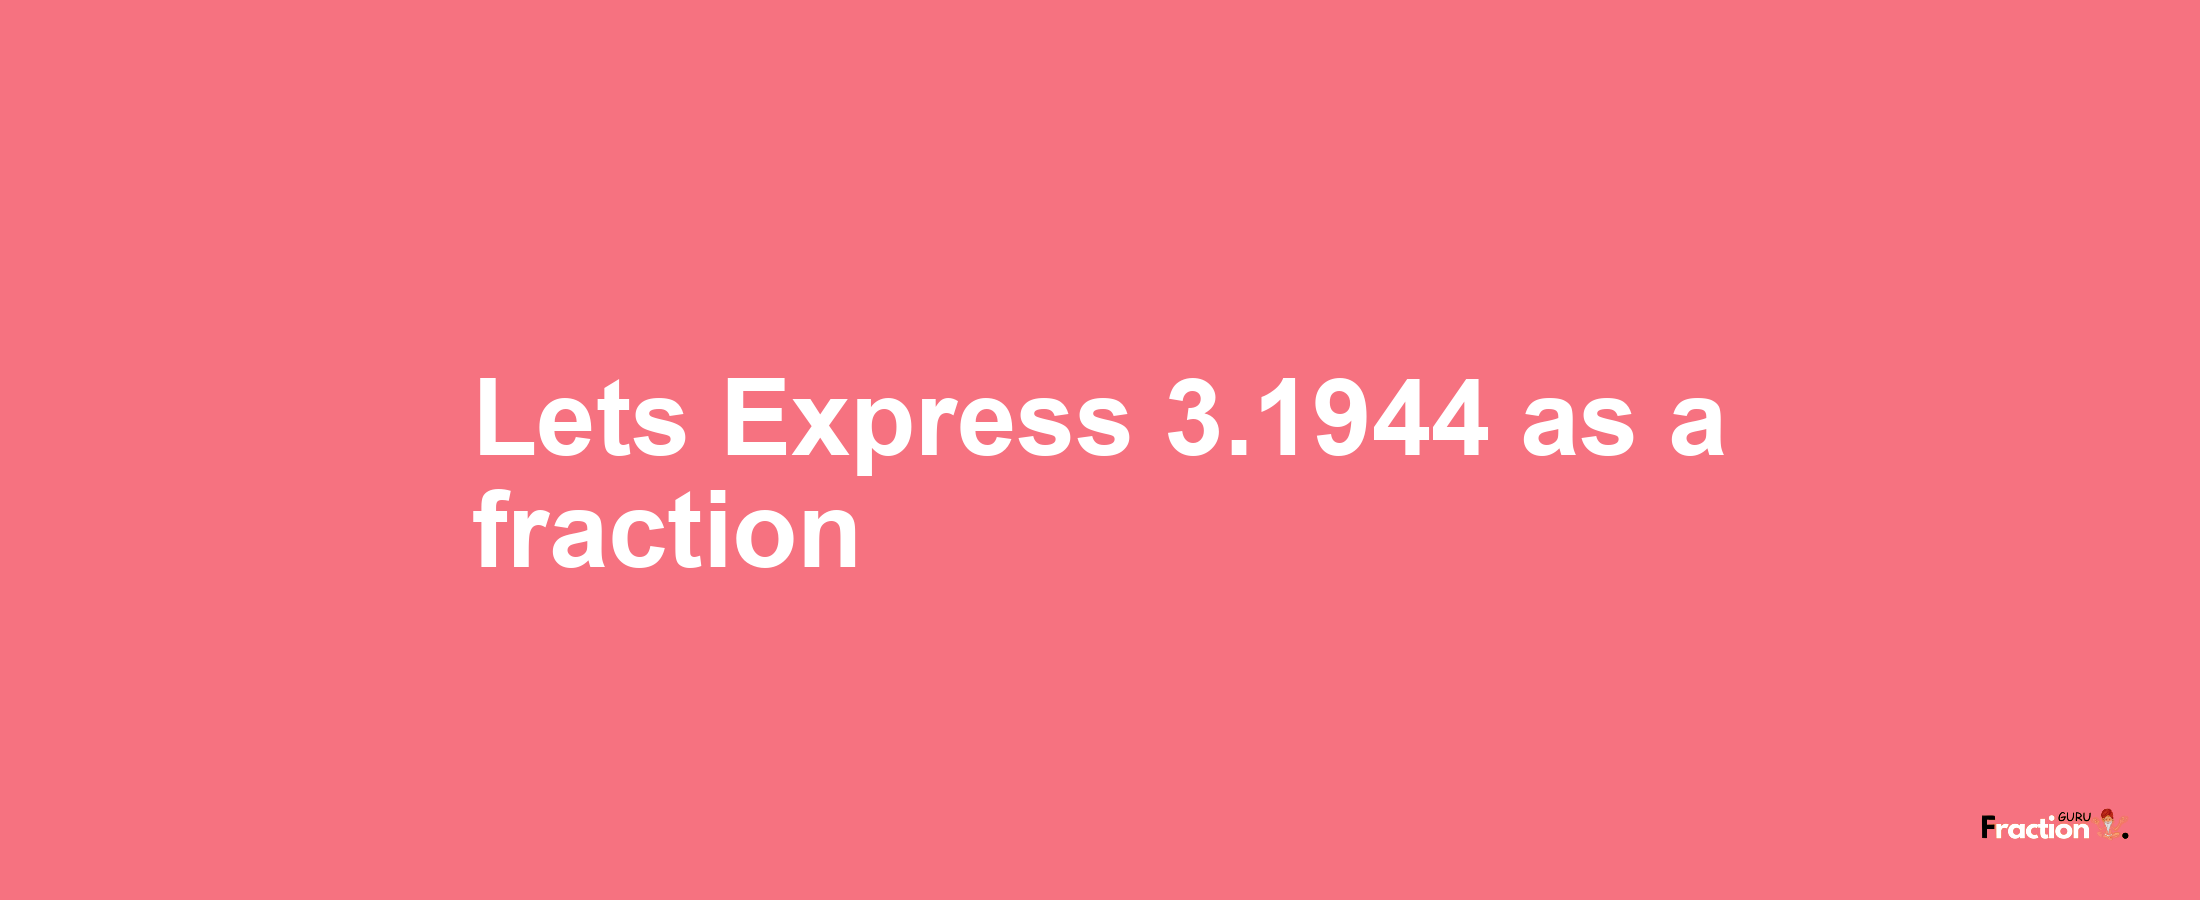 Lets Express 3.1944 as afraction